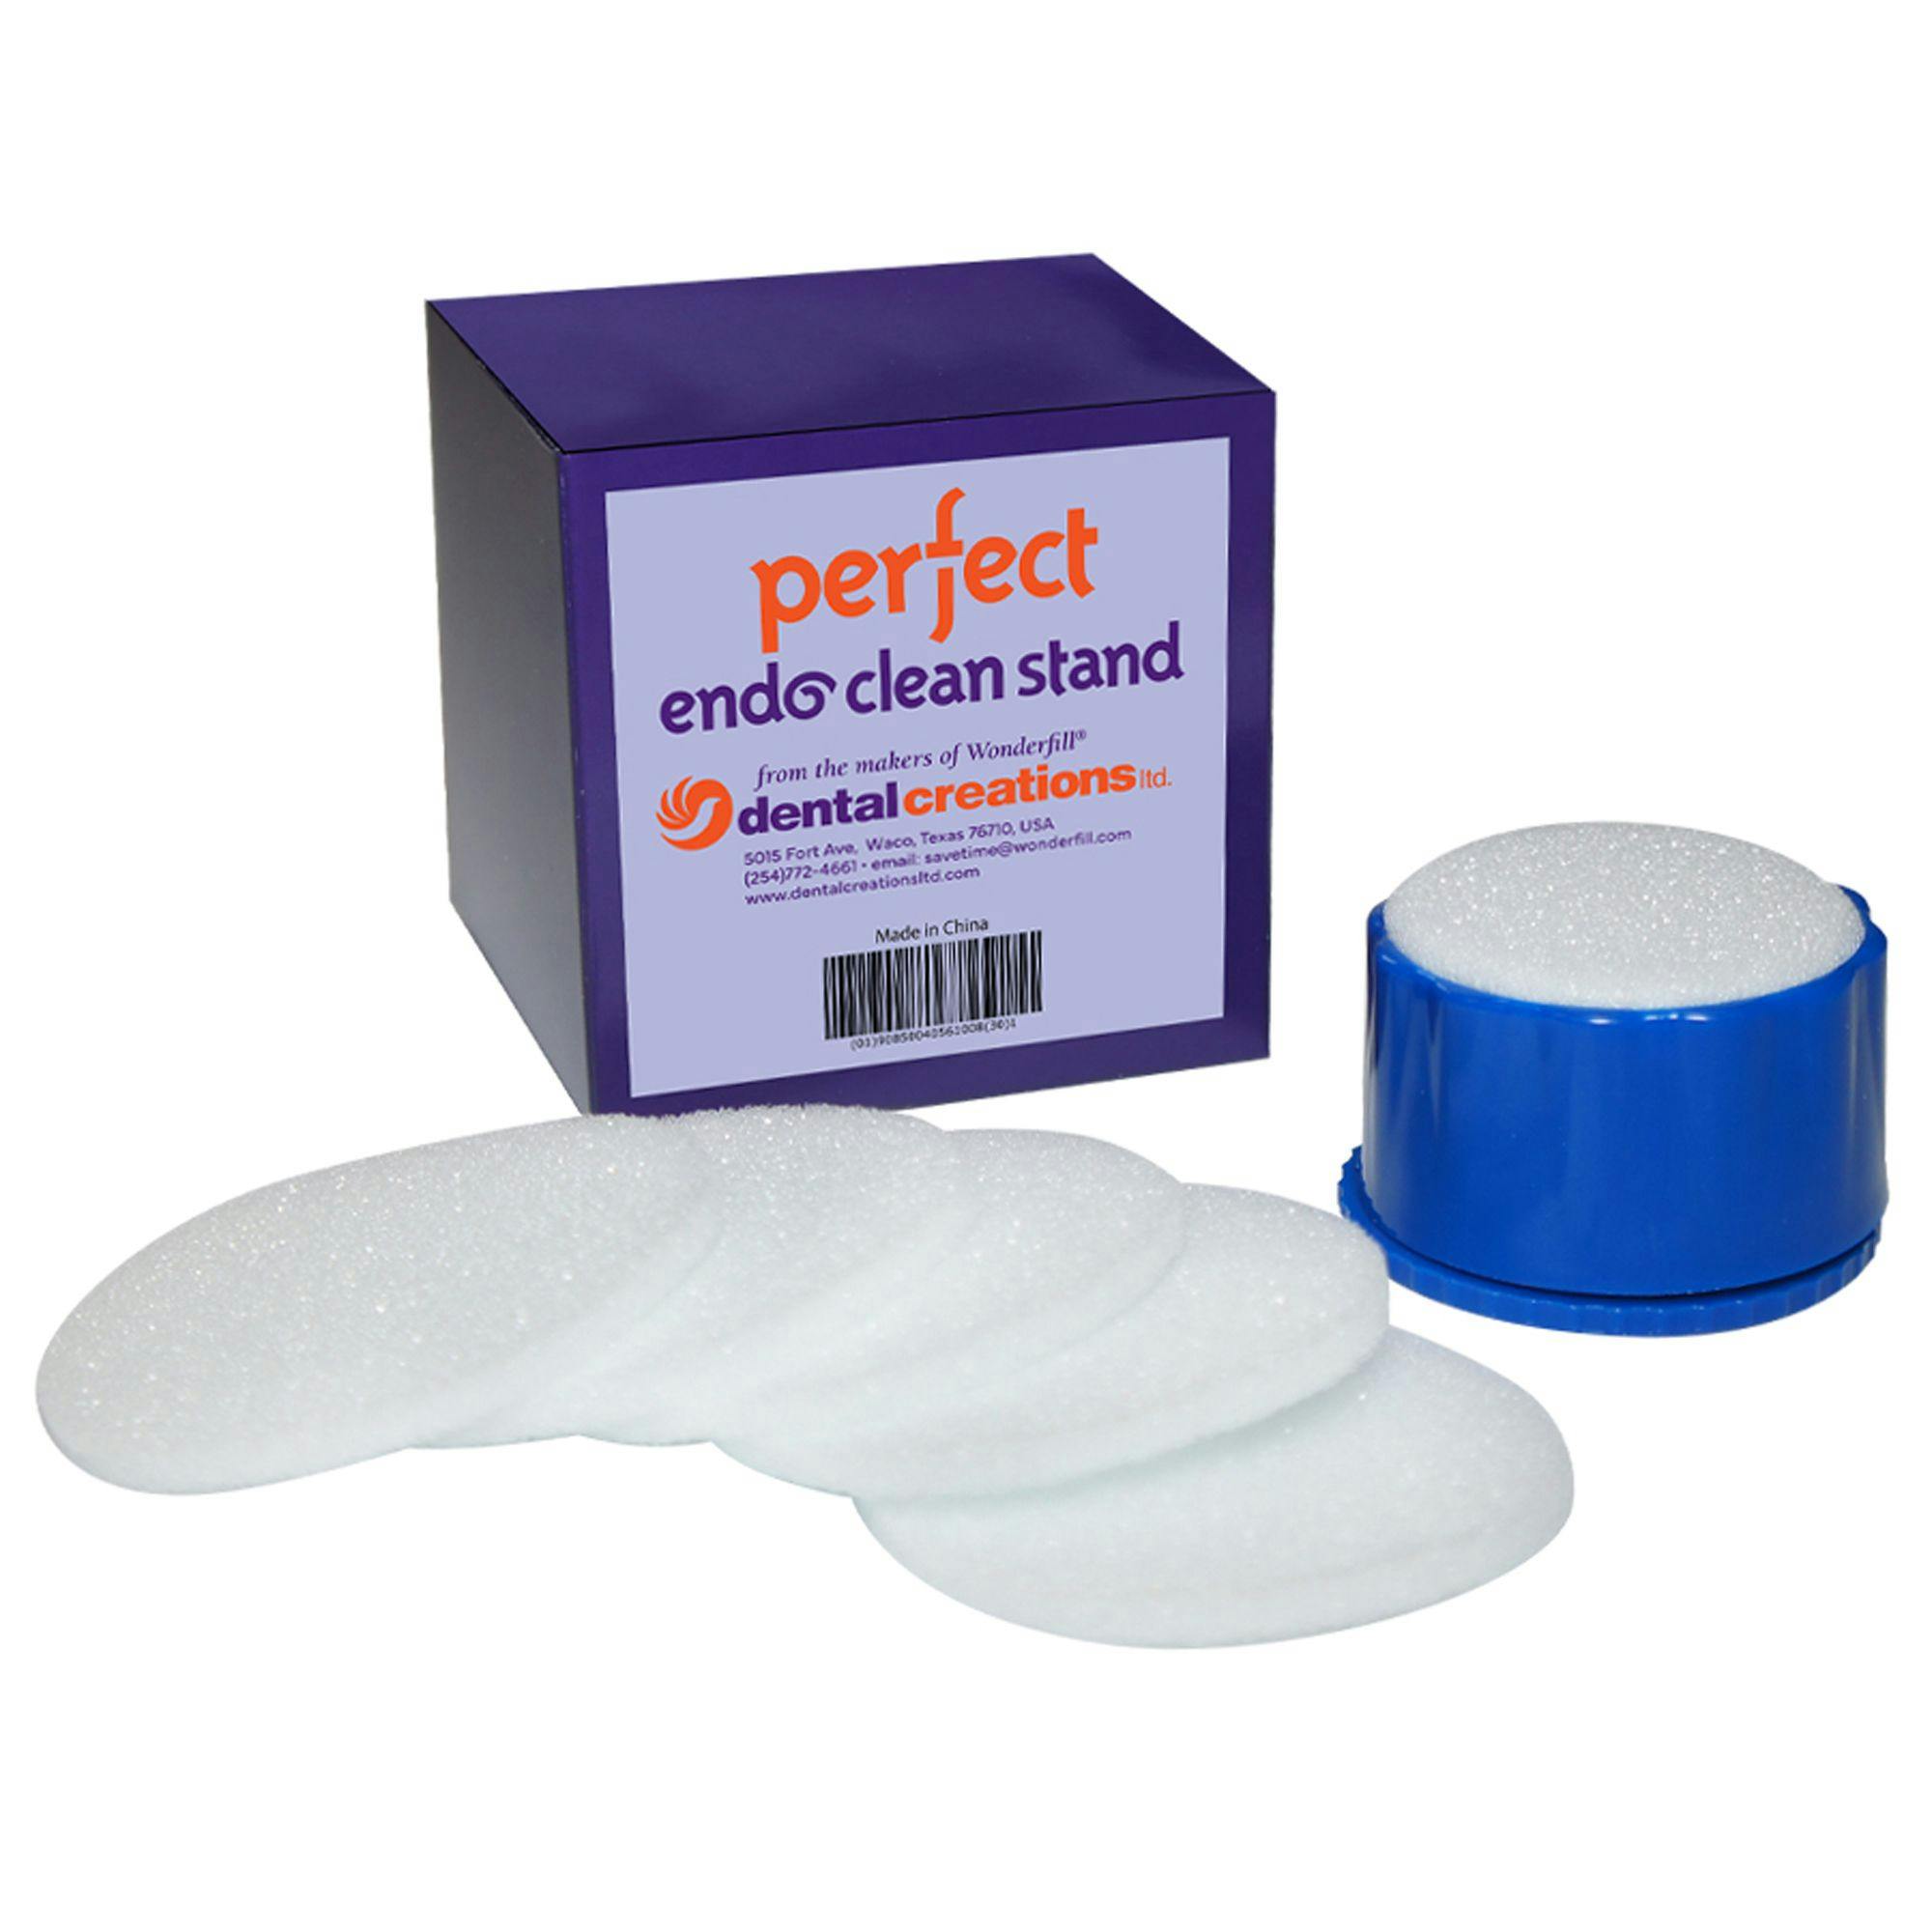 Dental Creations Launches Perfect Endo Clean Stand